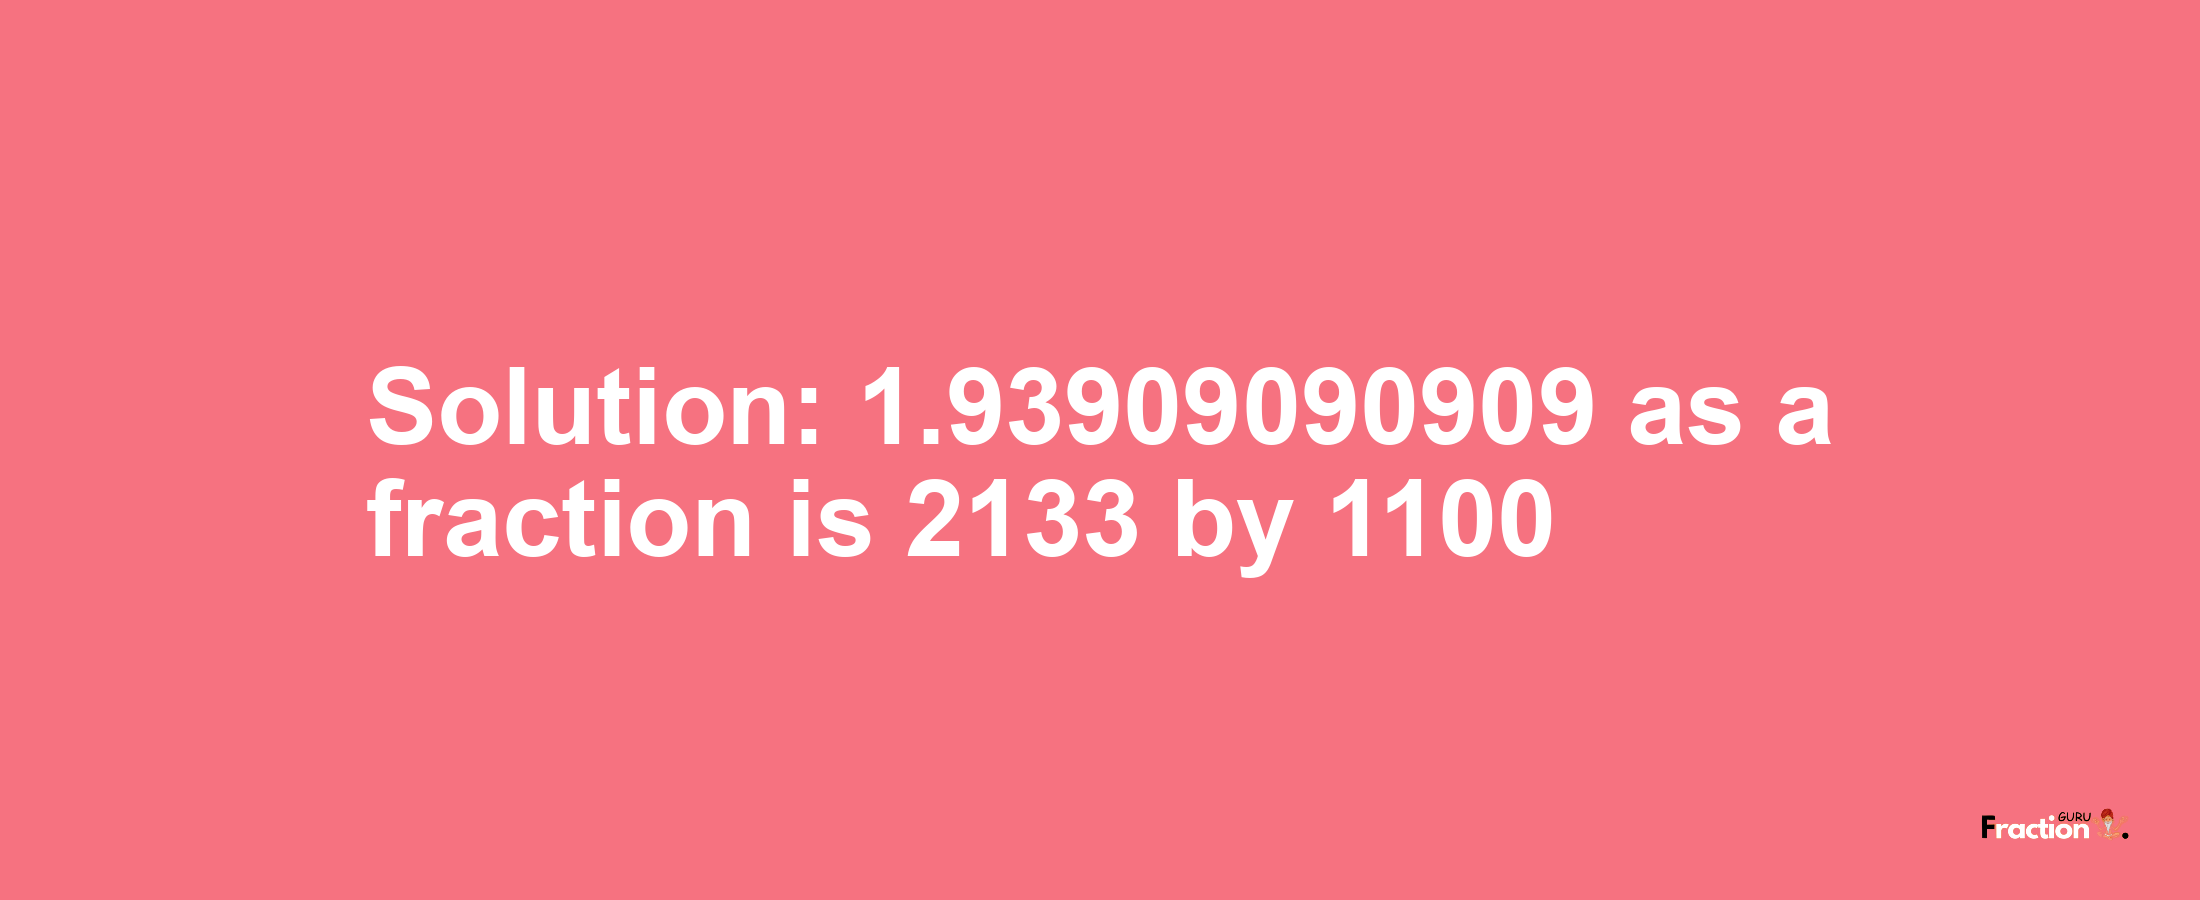 Solution:1.93909090909 as a fraction is 2133/1100